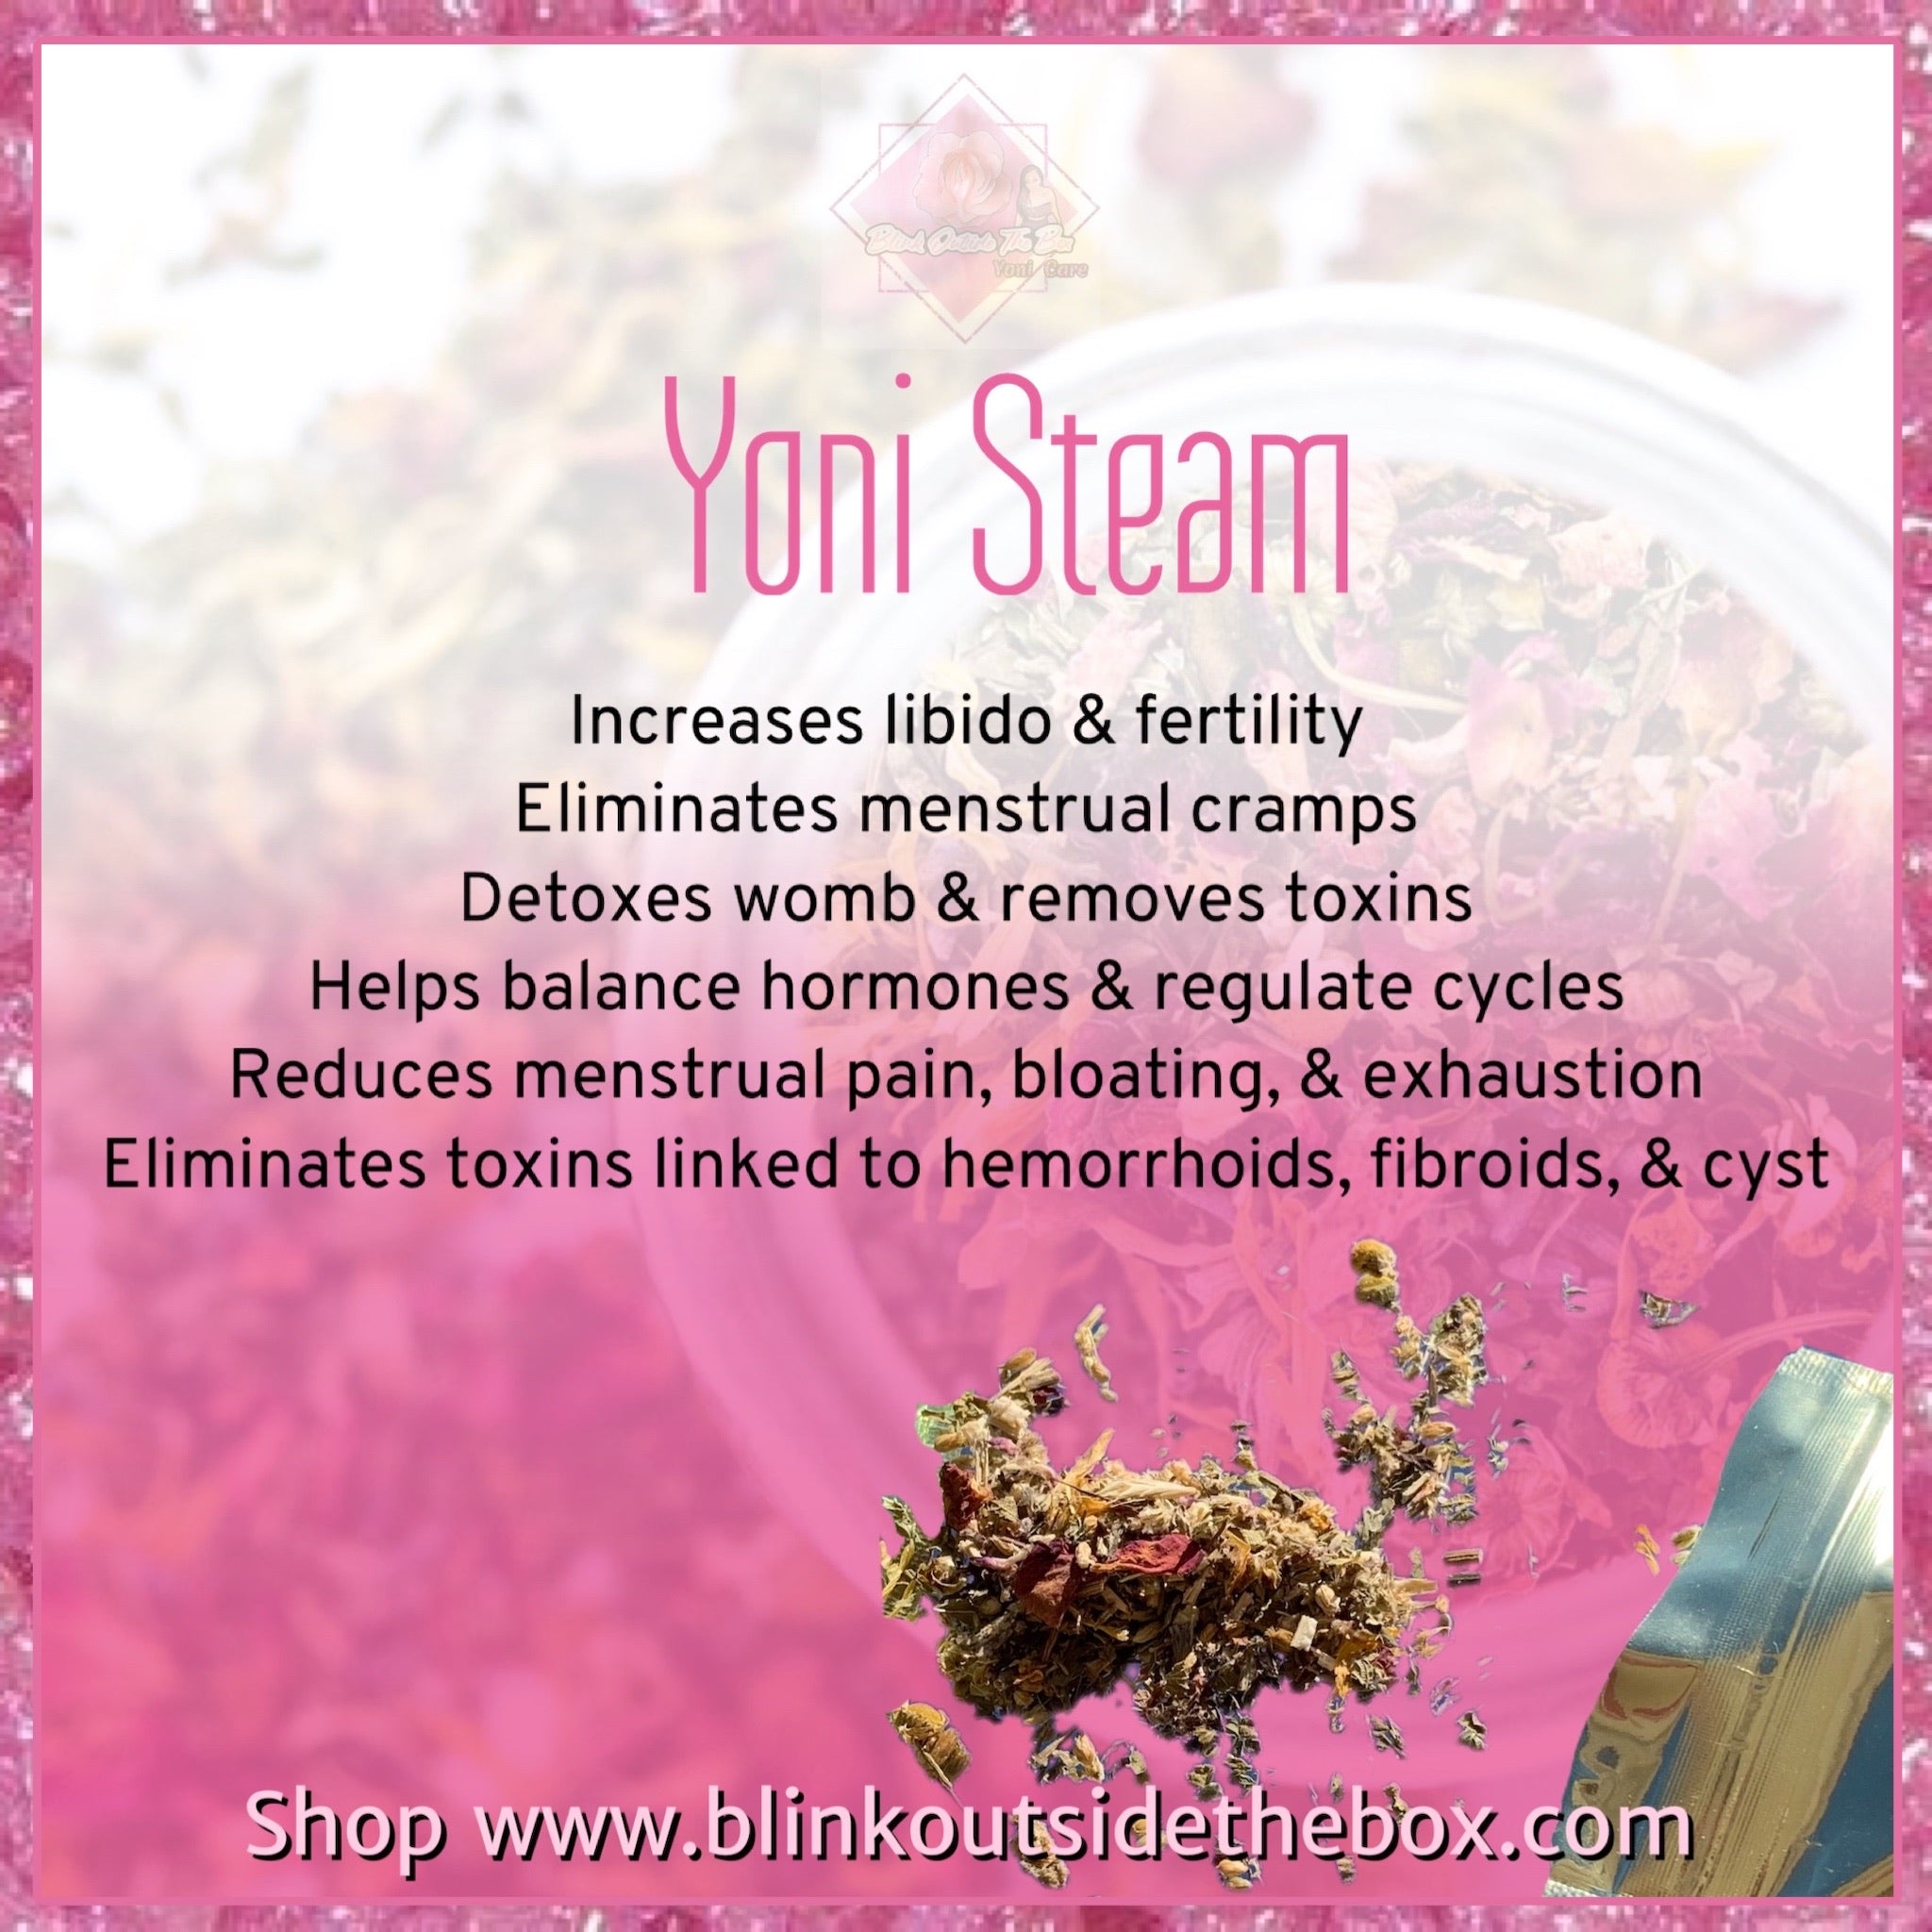 yoni steam side effects